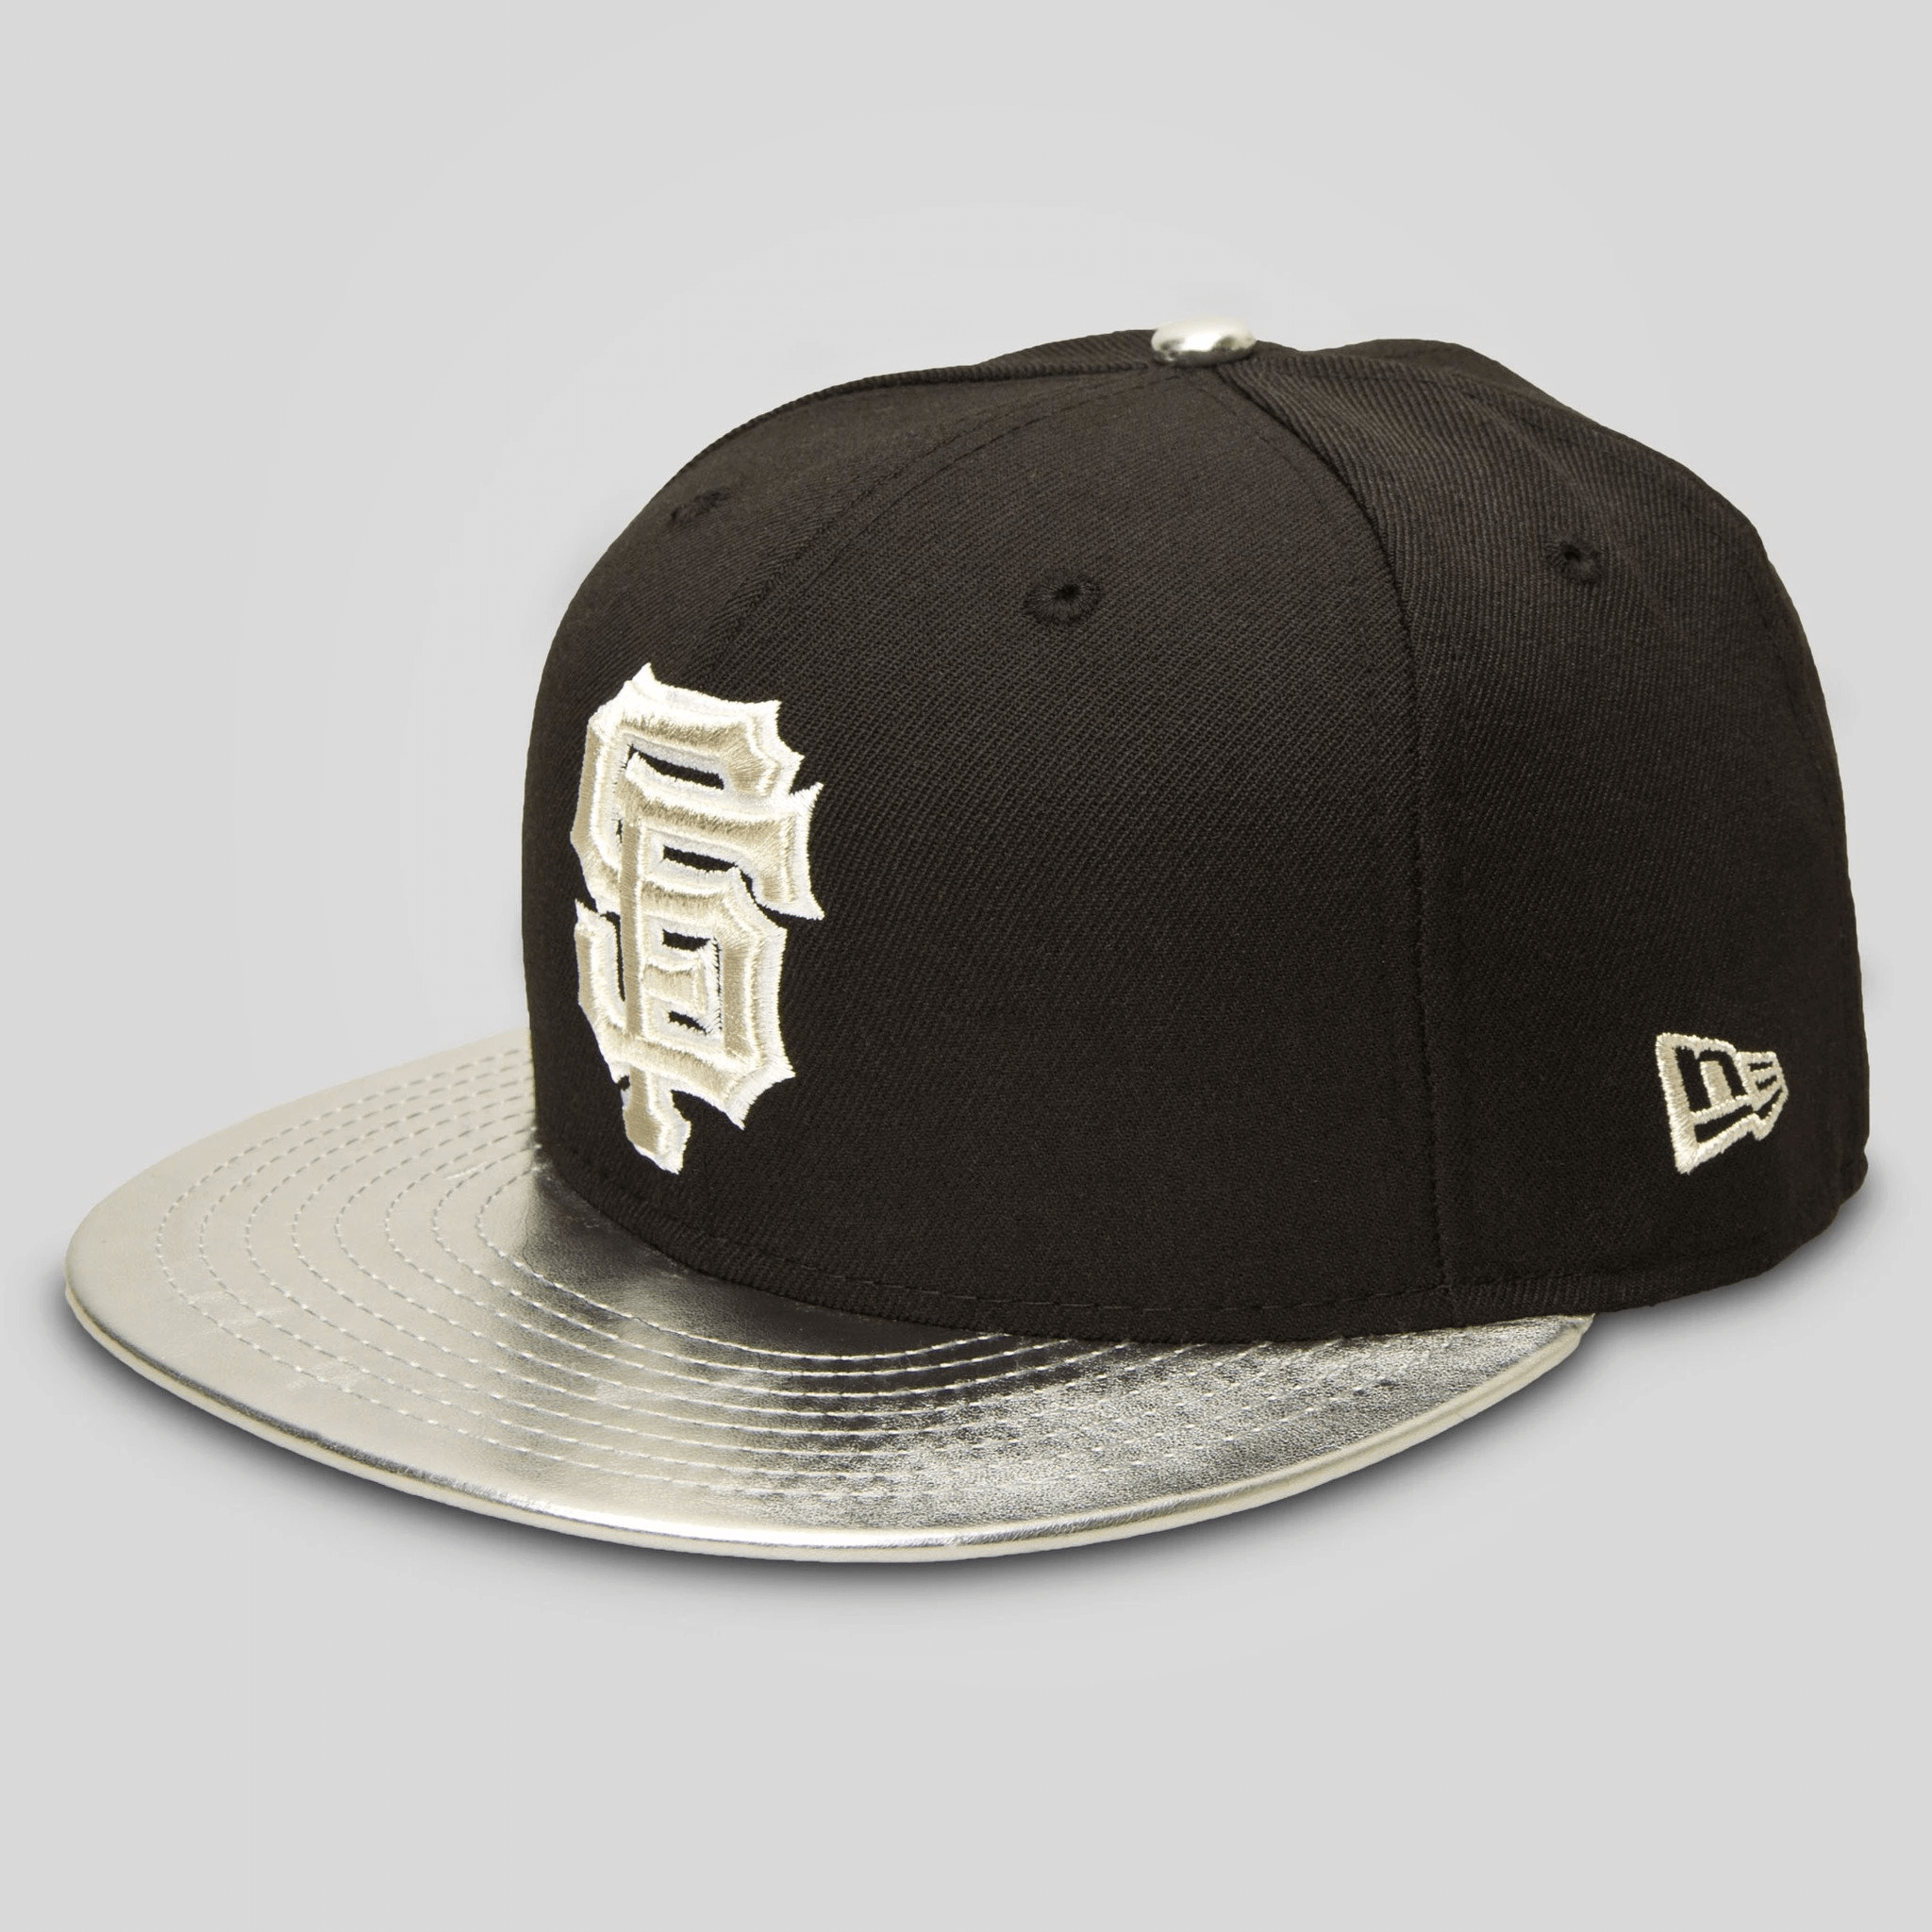 Anybody know where I can get the New Era SnapBack with the Super